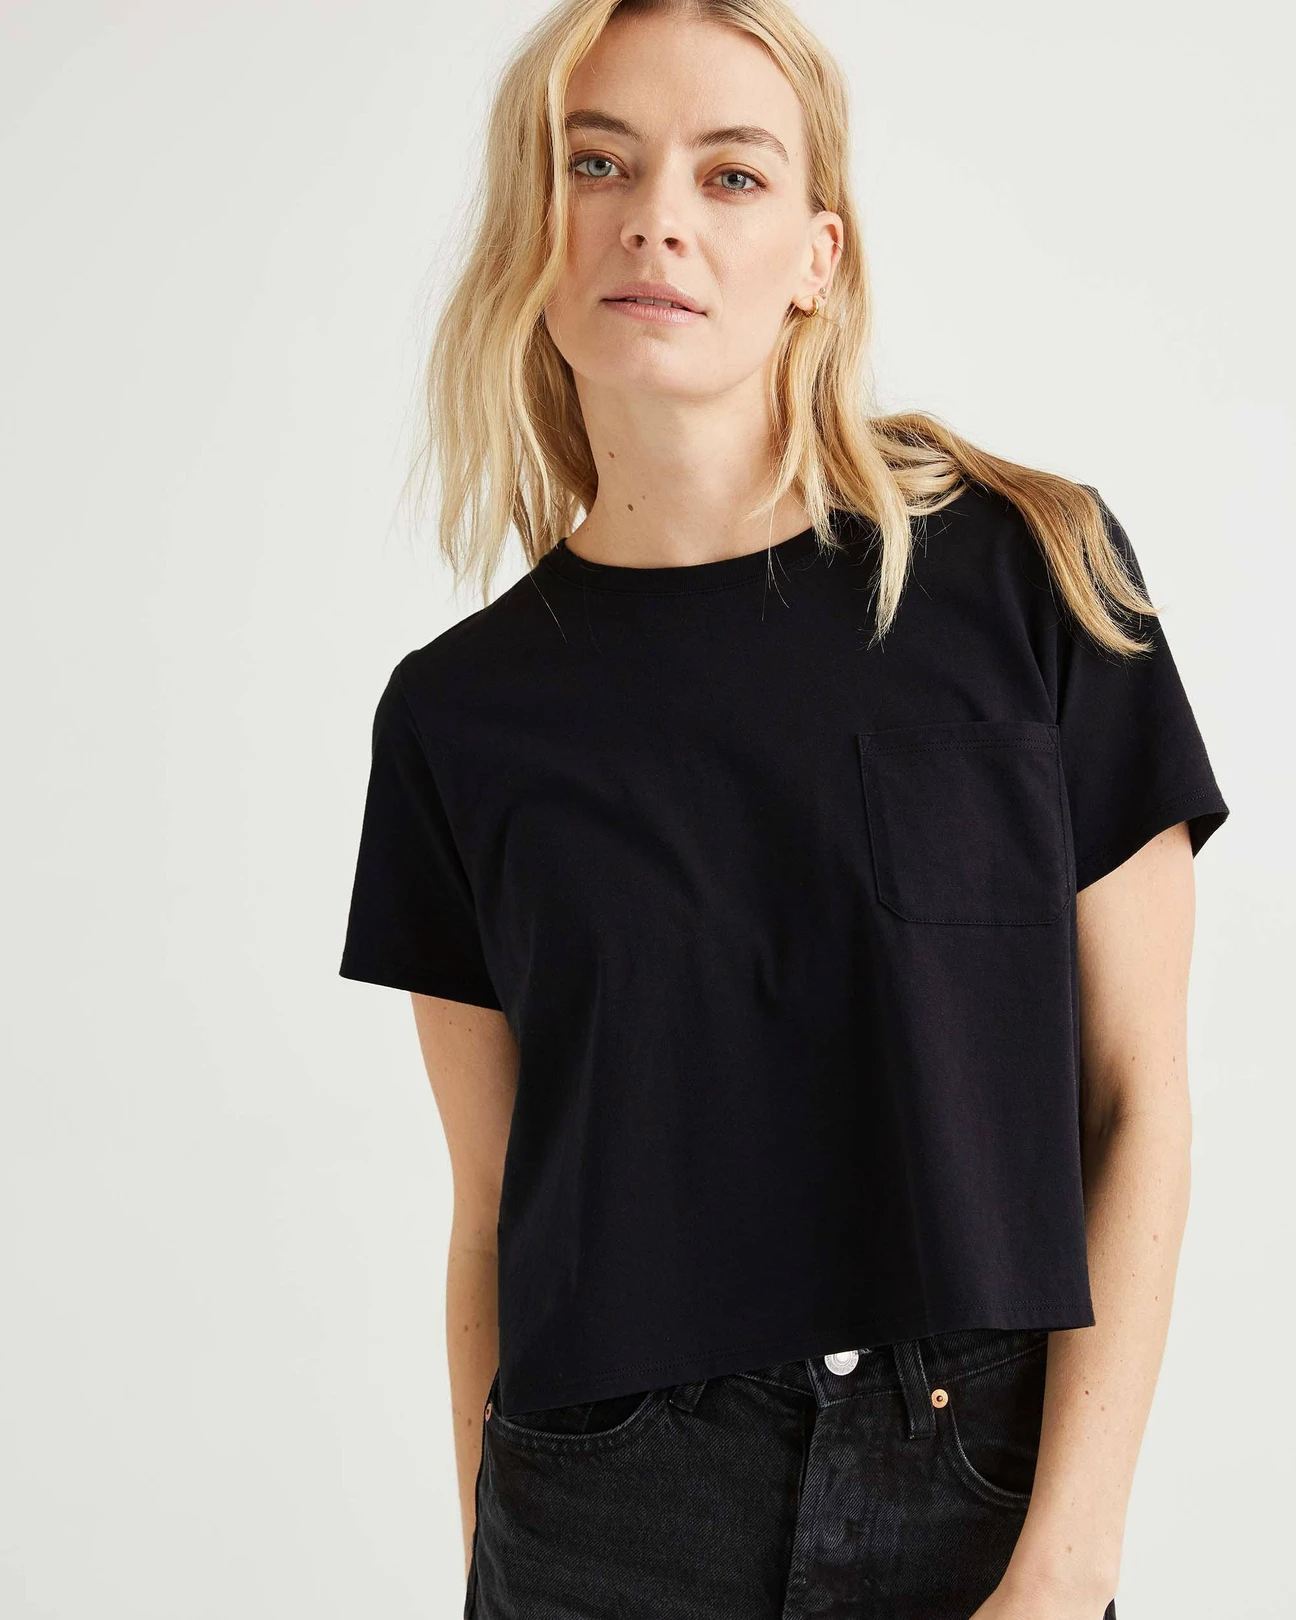 Buy > pack of black t shirts women's > in stock